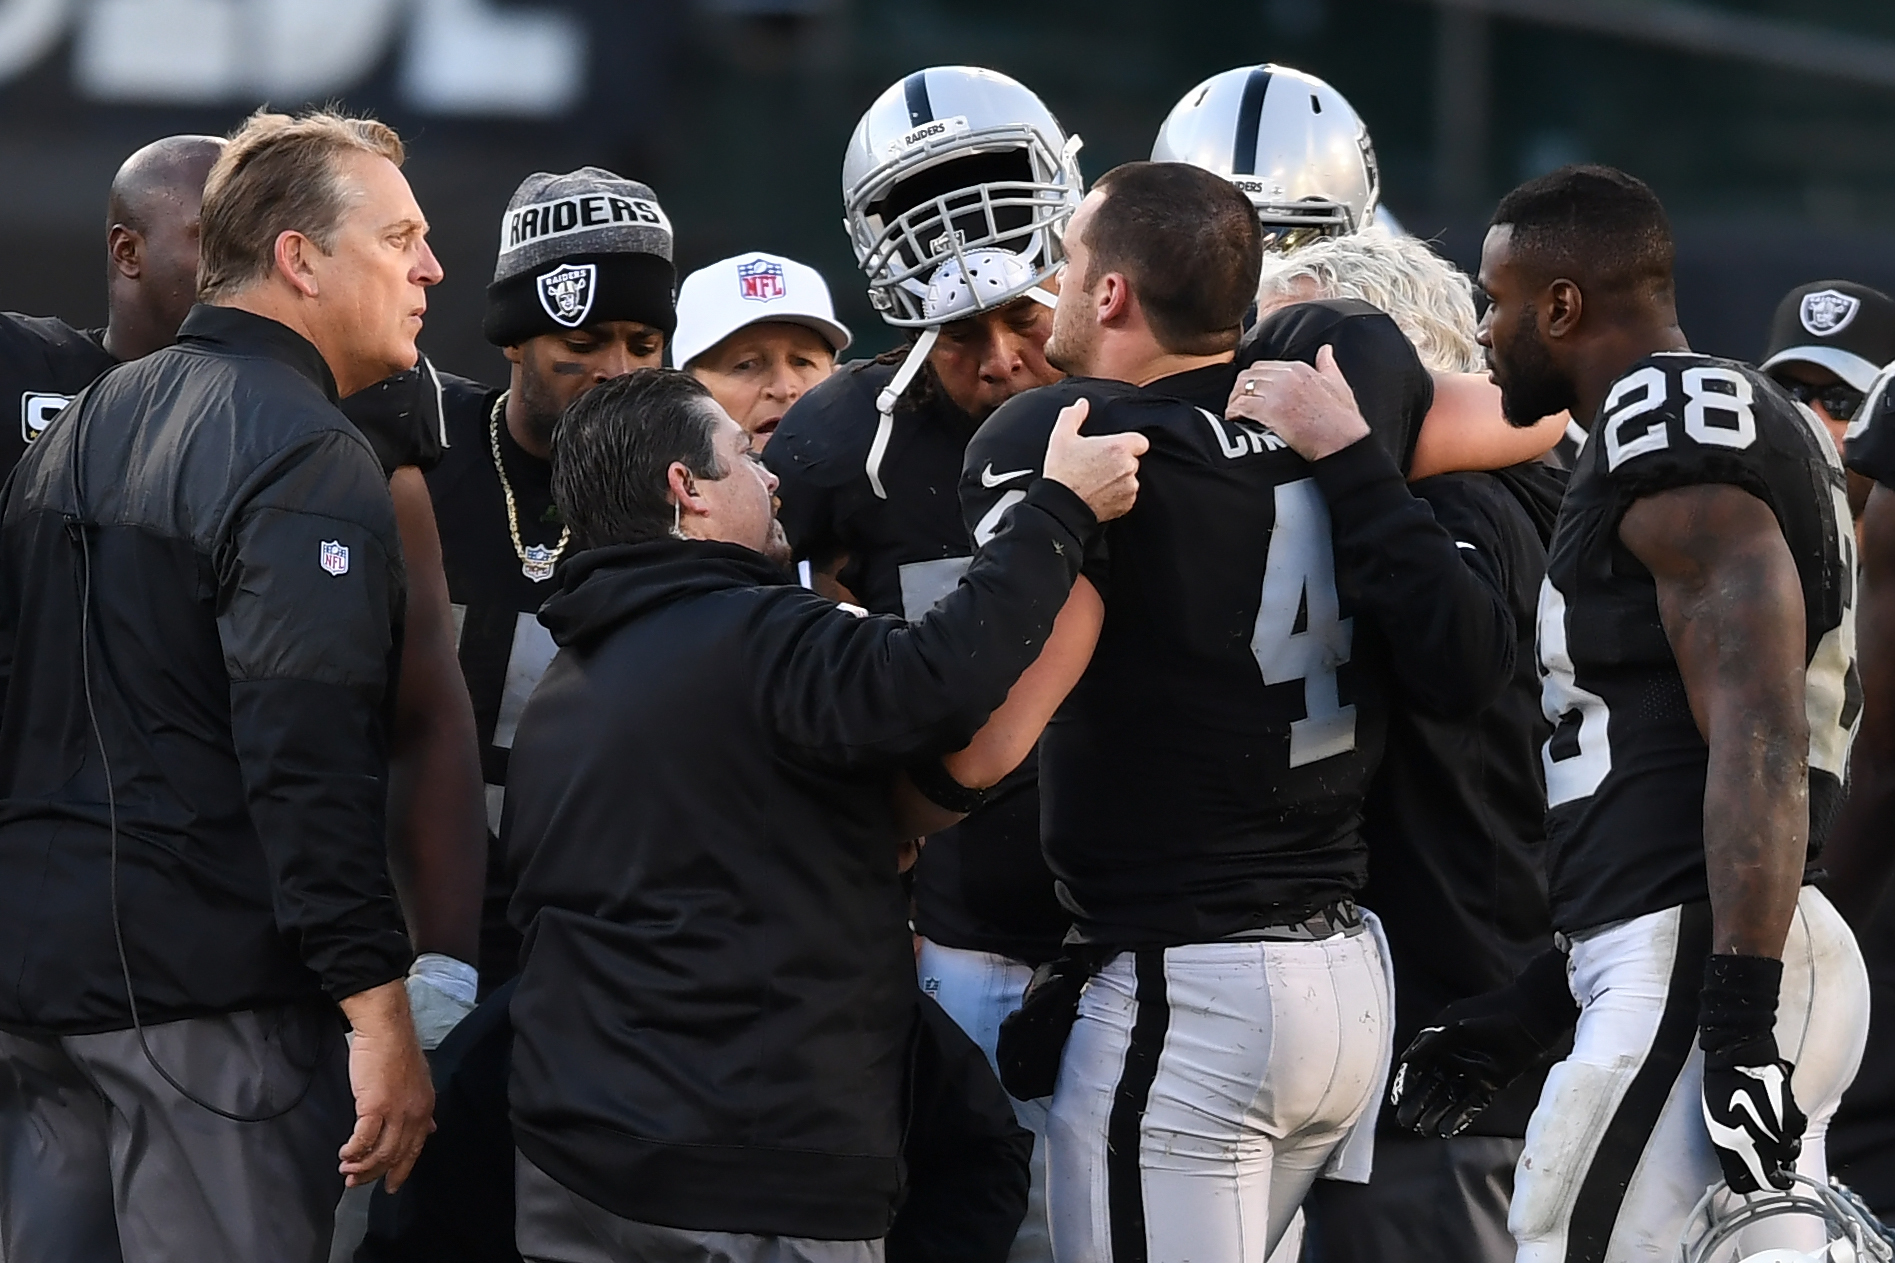 OAKLAND, CA - DECEMBER 24:  Derek Carr #4 of the Oakland Raiders is helped off the field after injuring his right leg during their NFL game against the Indianapolis Colts at Oakland Alameda Coliseum on December 24, 2016 in Oakland, California.  (Photo by Thearon W. Henderson/Getty Images)